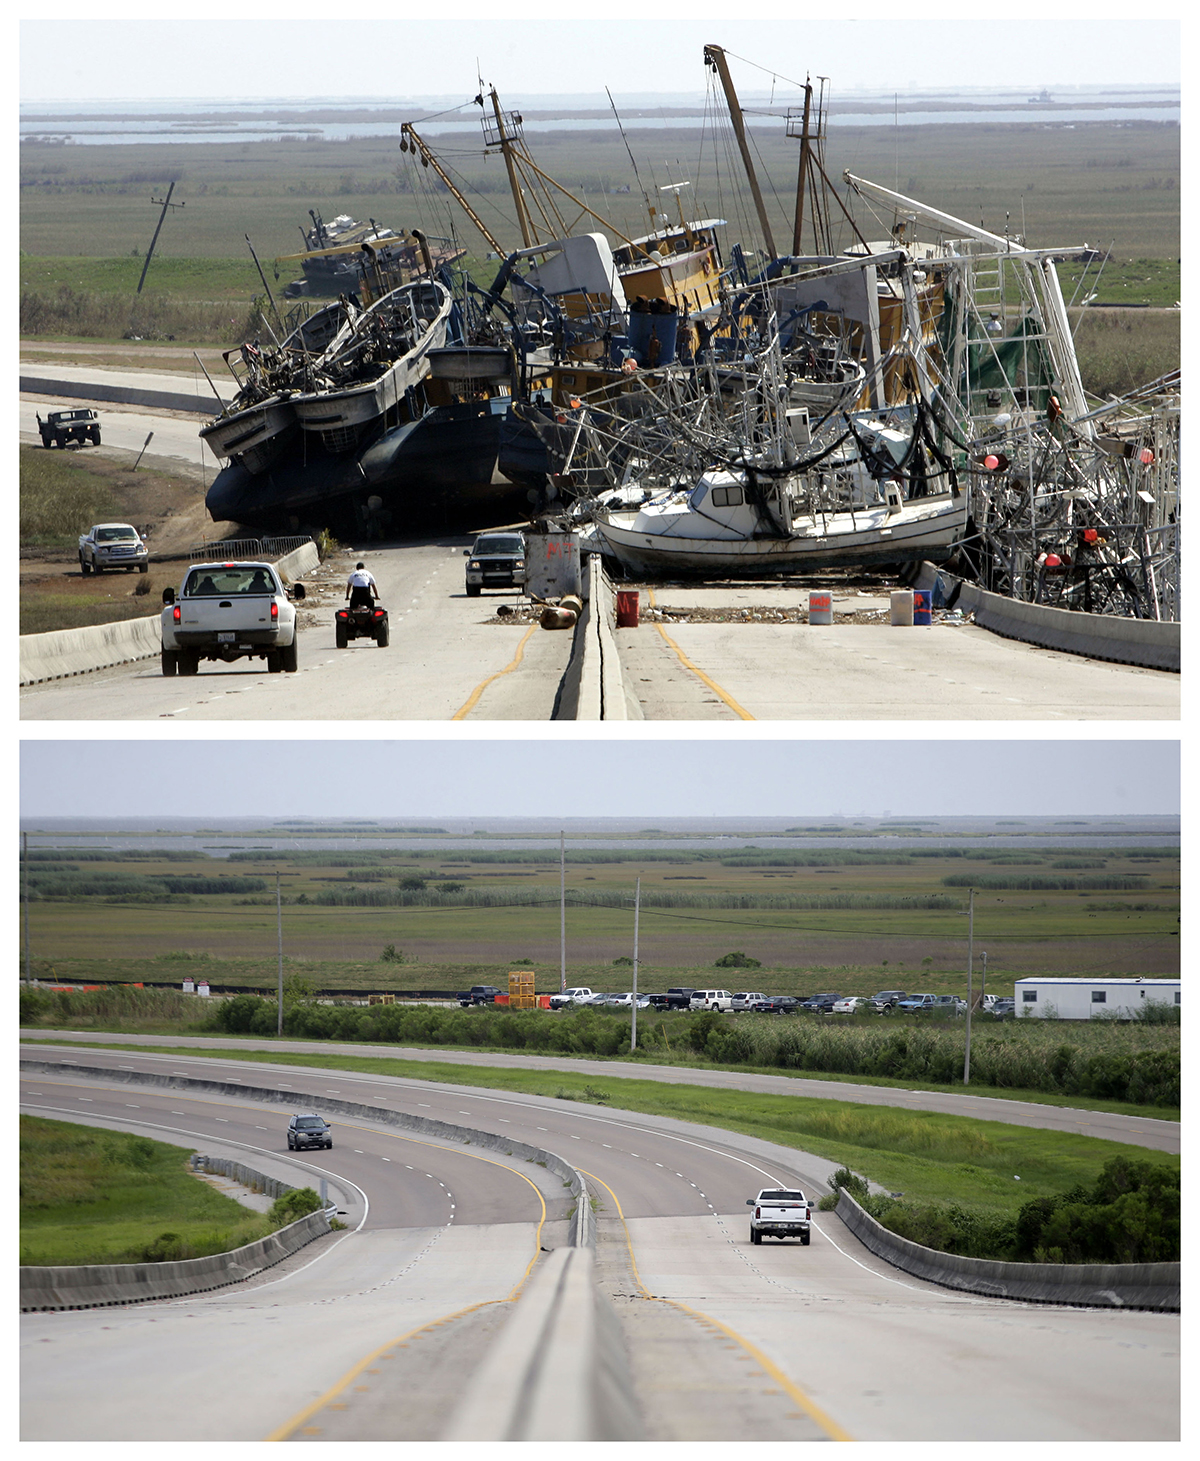 This combination of Oct. 10, 2005, and Aug. 4, 2015, photos shows a tangle of fishing boats blocking the lanes of Highway 23 in Empire, Louisiana, after Hurricane Katrina ravaged the region, and the same site a decade later. (Don Ryan, Gerald Herbert / Associated Press)